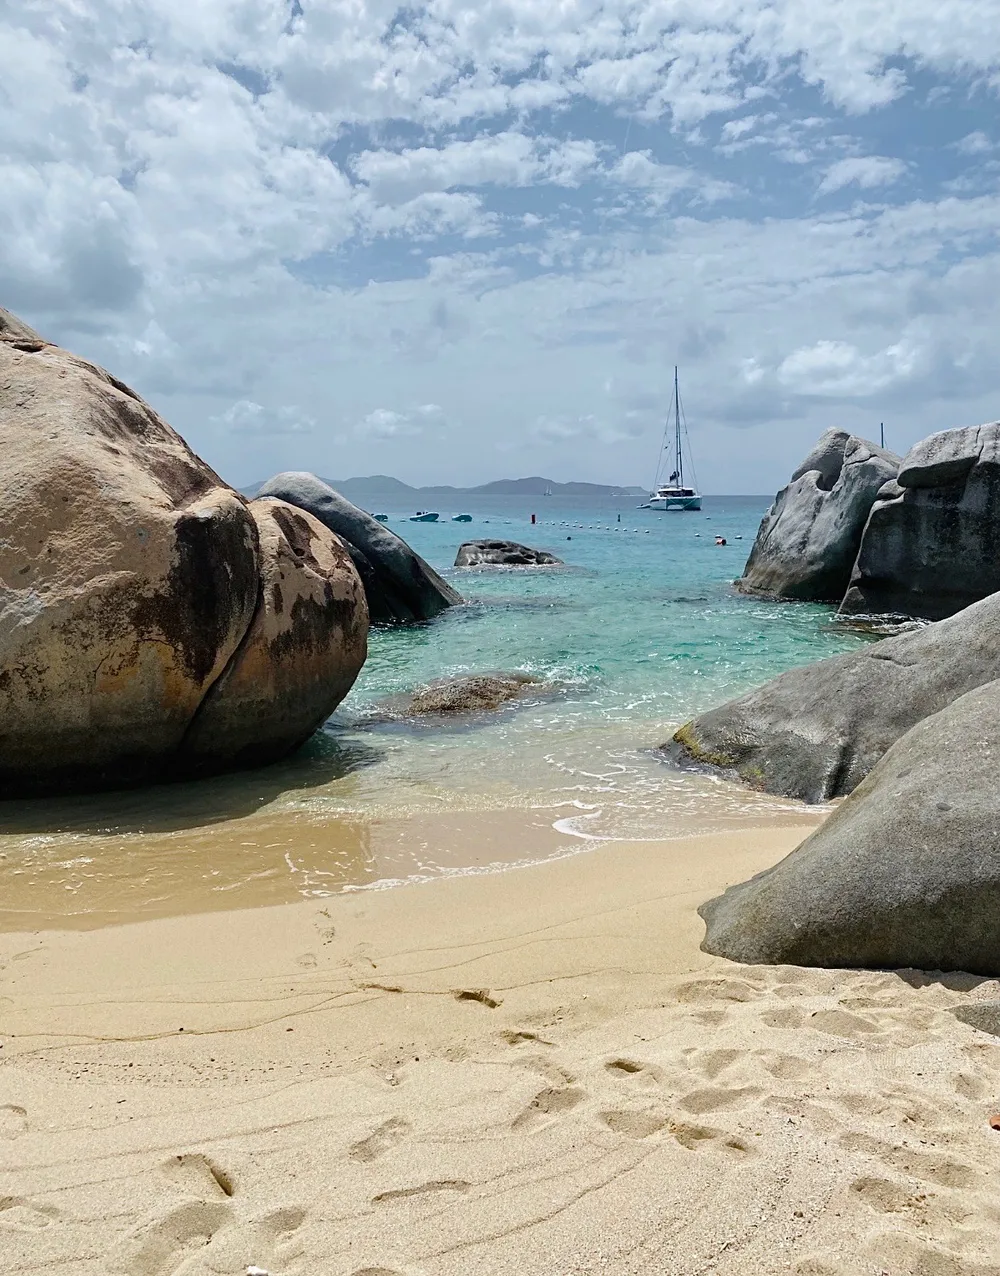 Throughout sailing the British Virgin Islands coasts we stopped at a beautiful island, nicknamed the baths where this photo was taken.